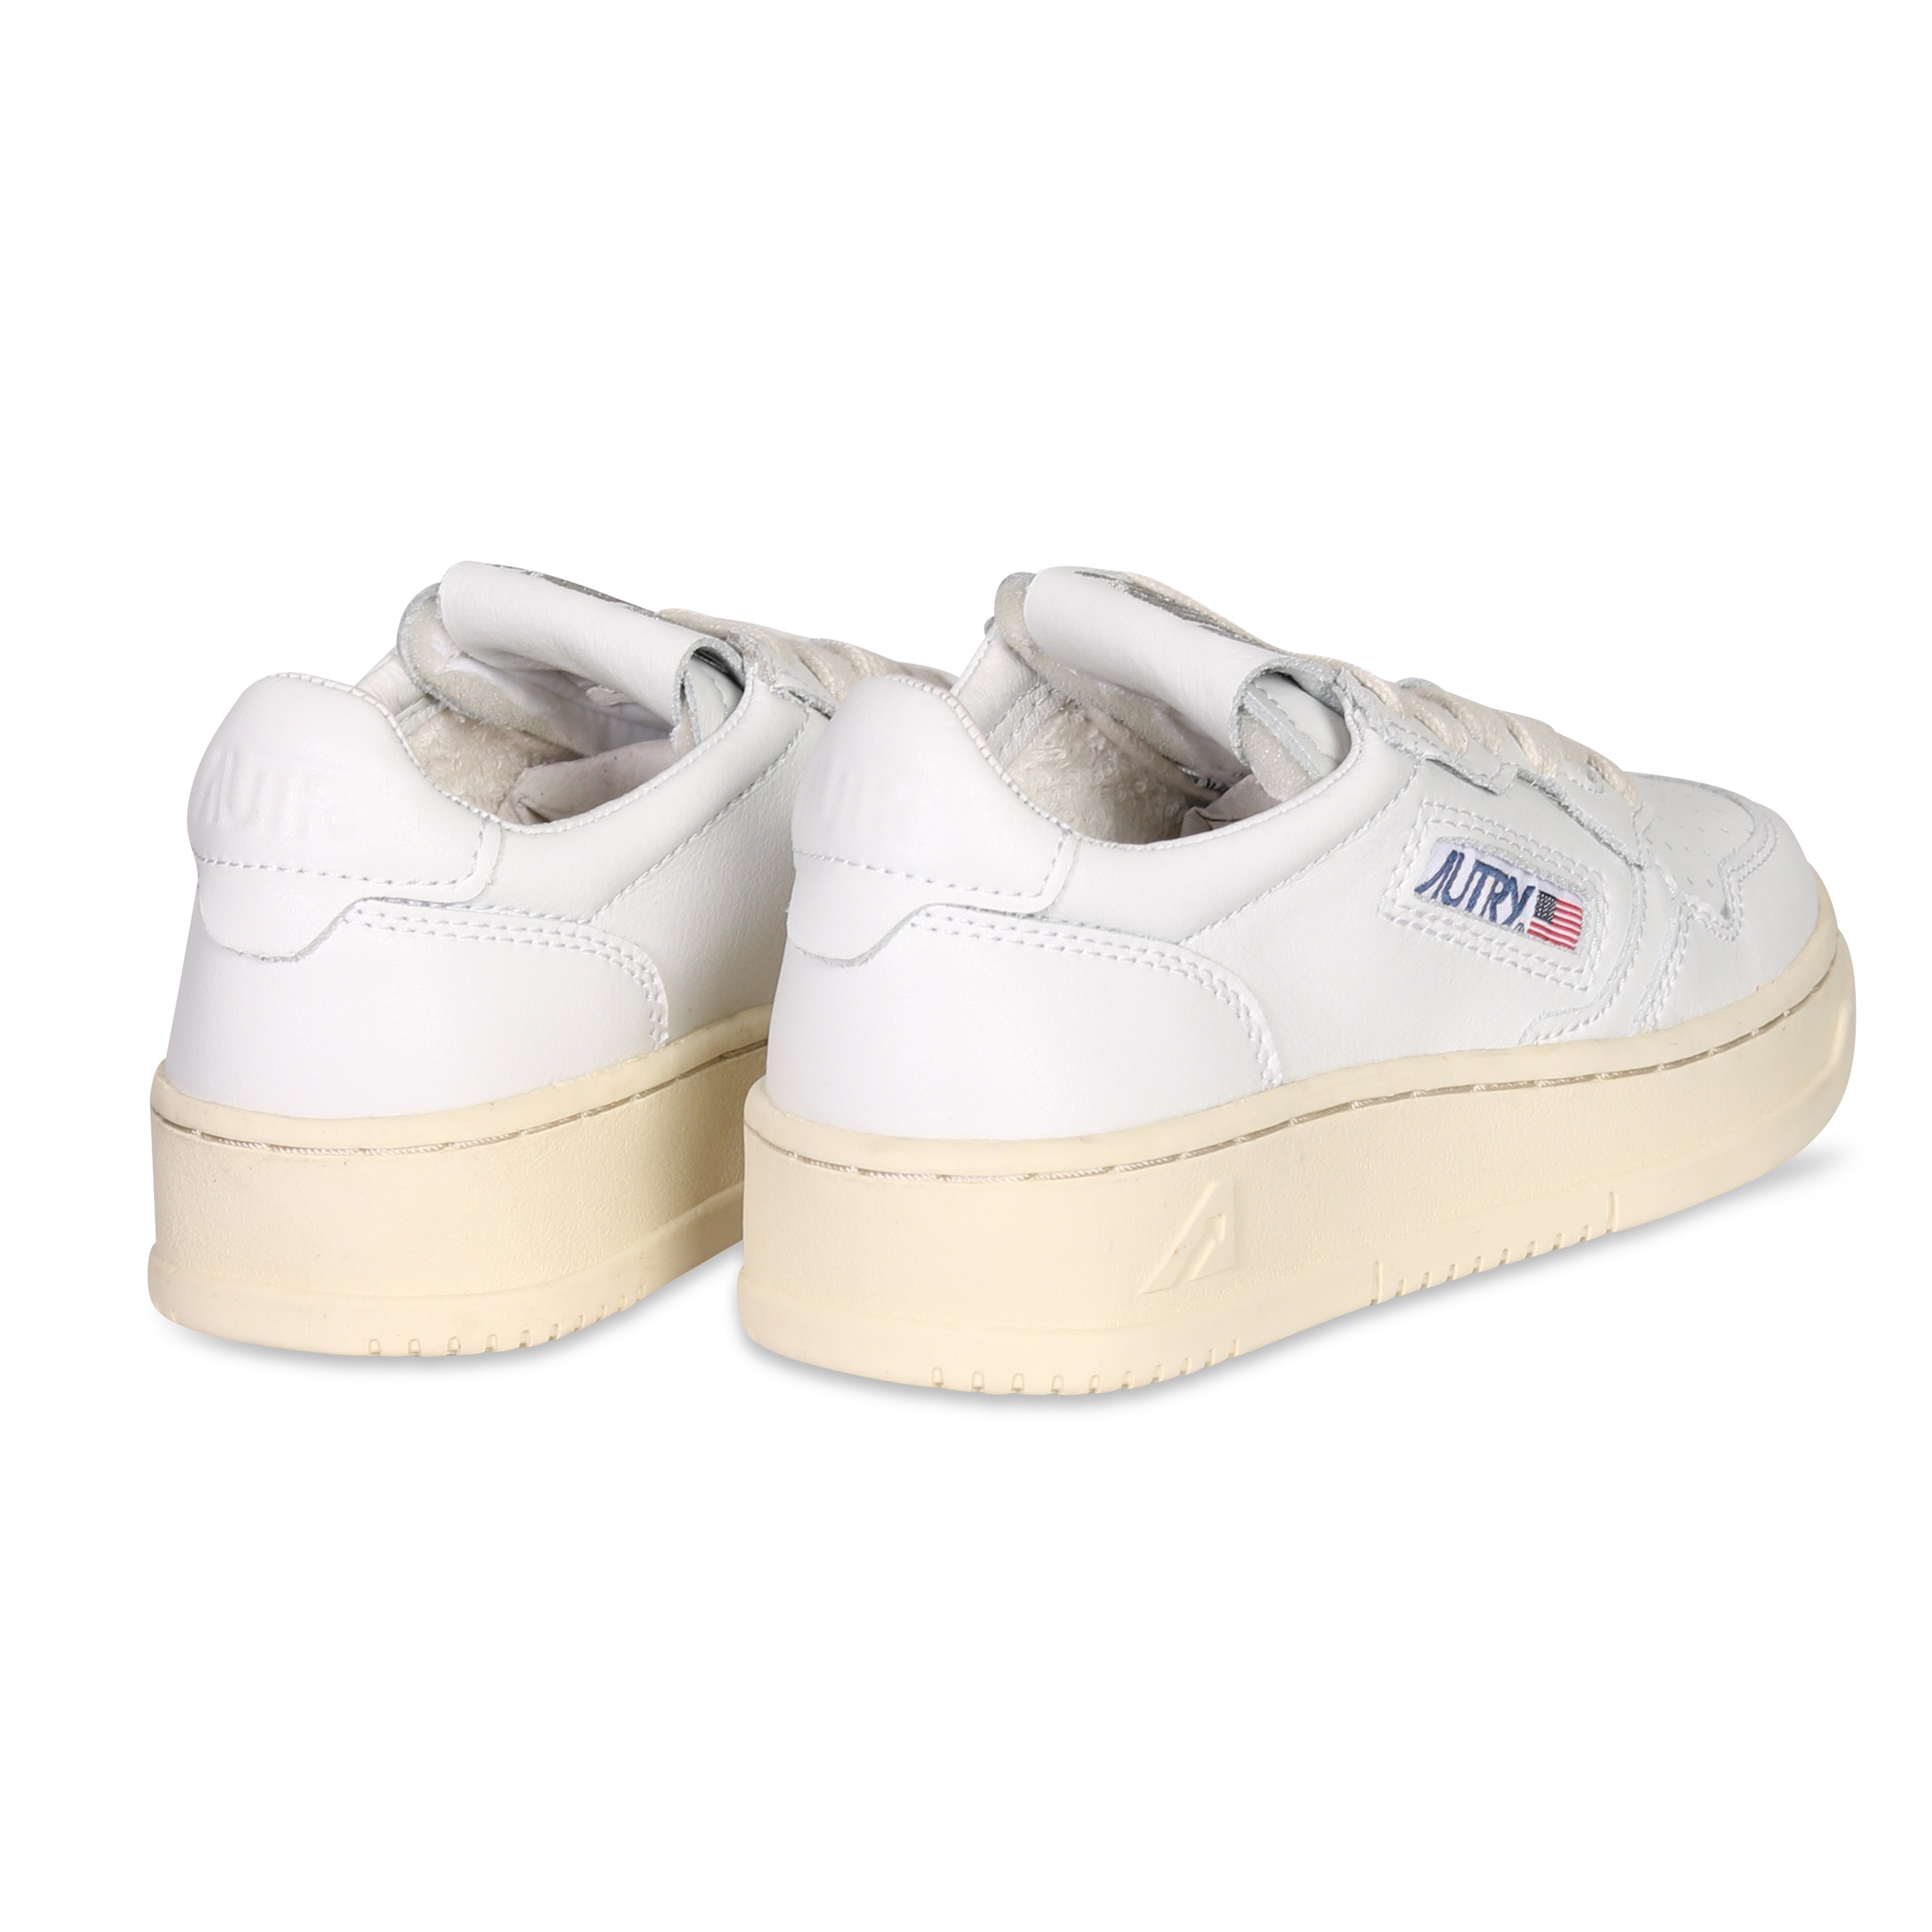 -Kids- Autry Action Shoes Low Sneaker in White